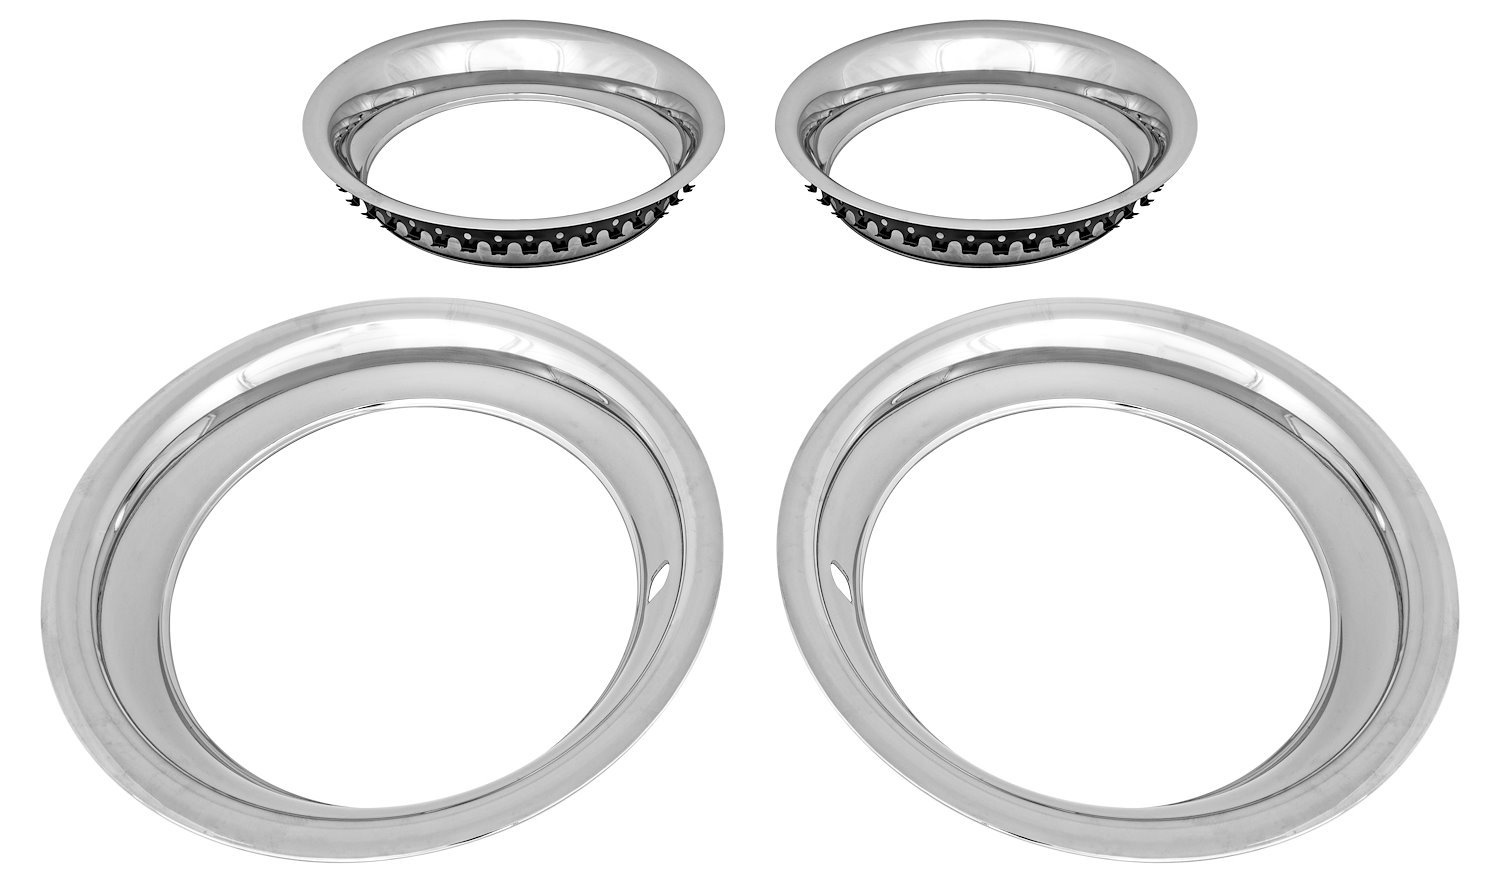 Stainless Steel Deep Dish Trim Ring Set for 15 in. x 8 in. Wheels [2.750 in. D x 3 in. W]